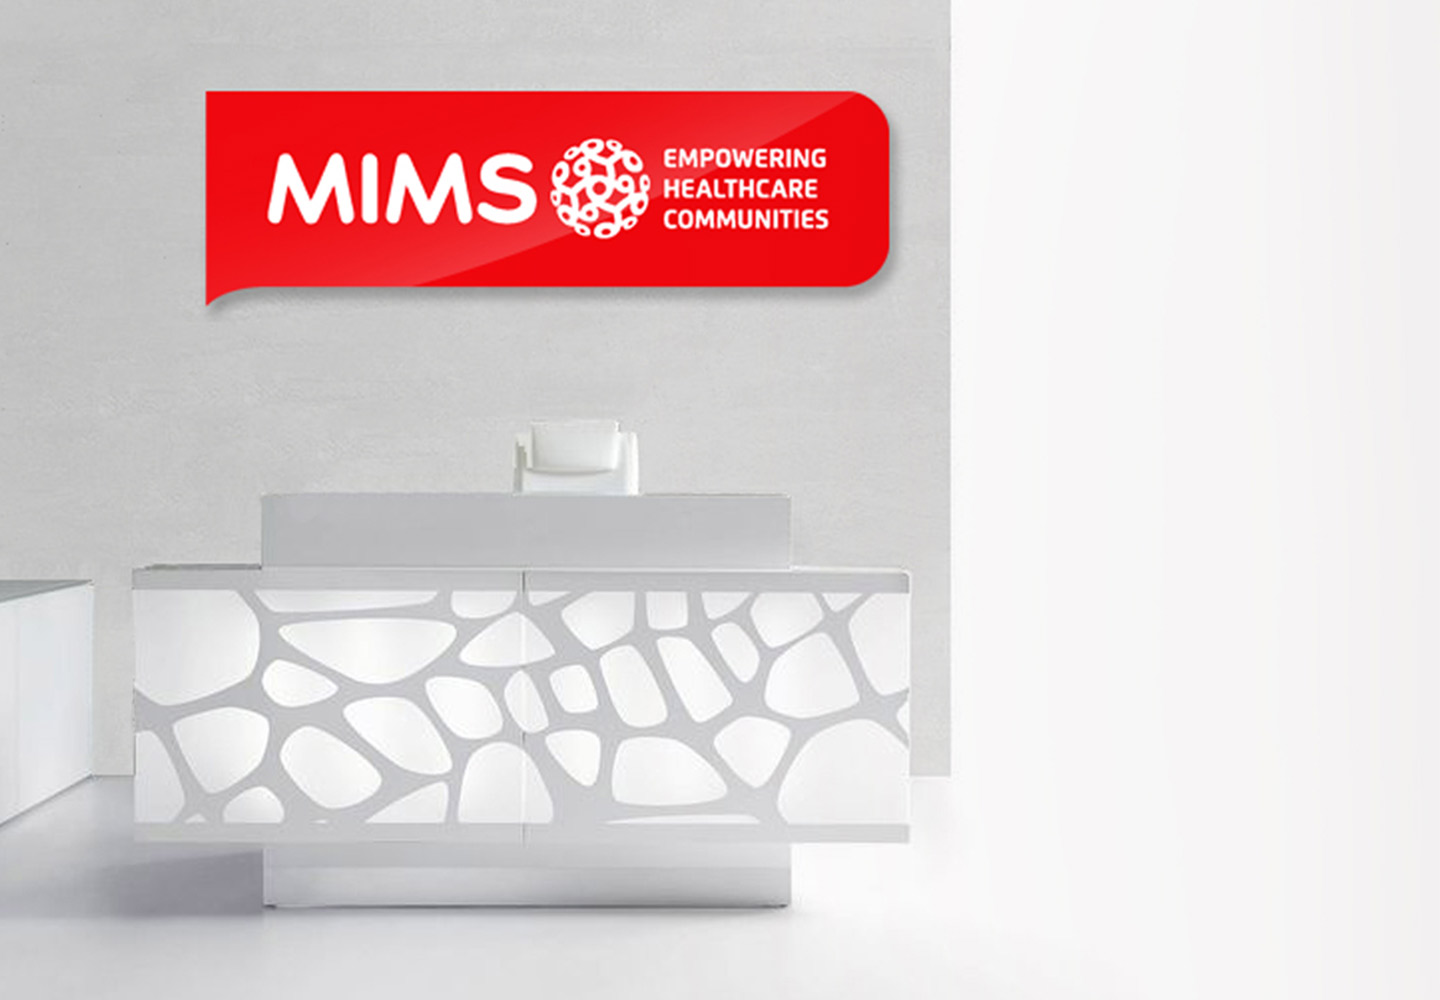 Brand Consultancy in Healthcare Industry. Reception for MIMS.